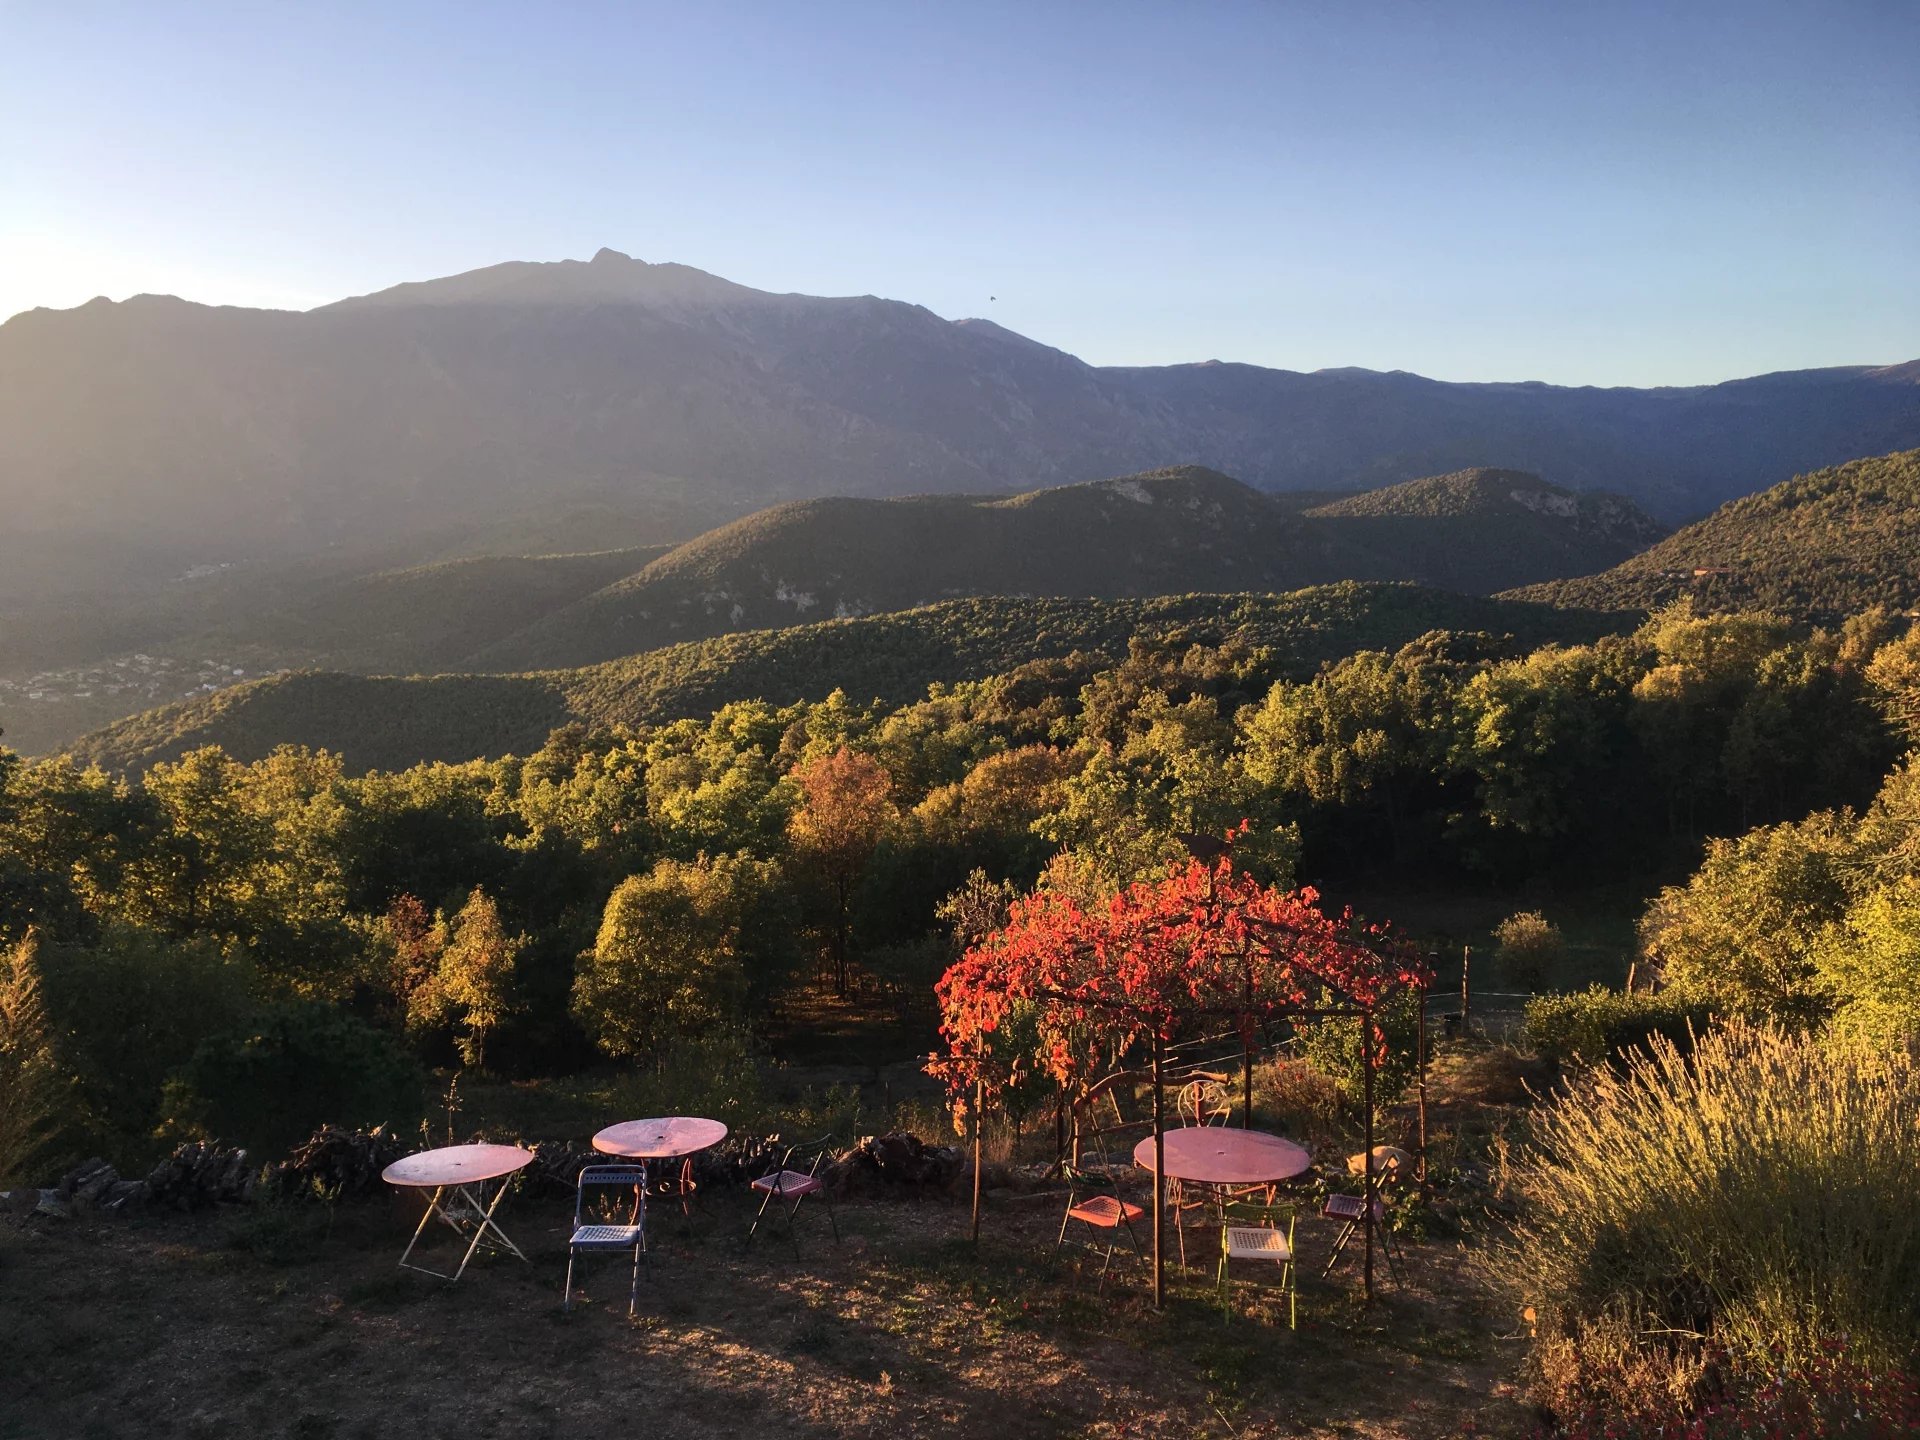 HAMLET OF 5 PROPERTIES SET ON AN EXCEPTIONAL SPOT FACING THE CANIGOU WITH STUNNING MOUNTAINS VIEWS, PRADES AREA